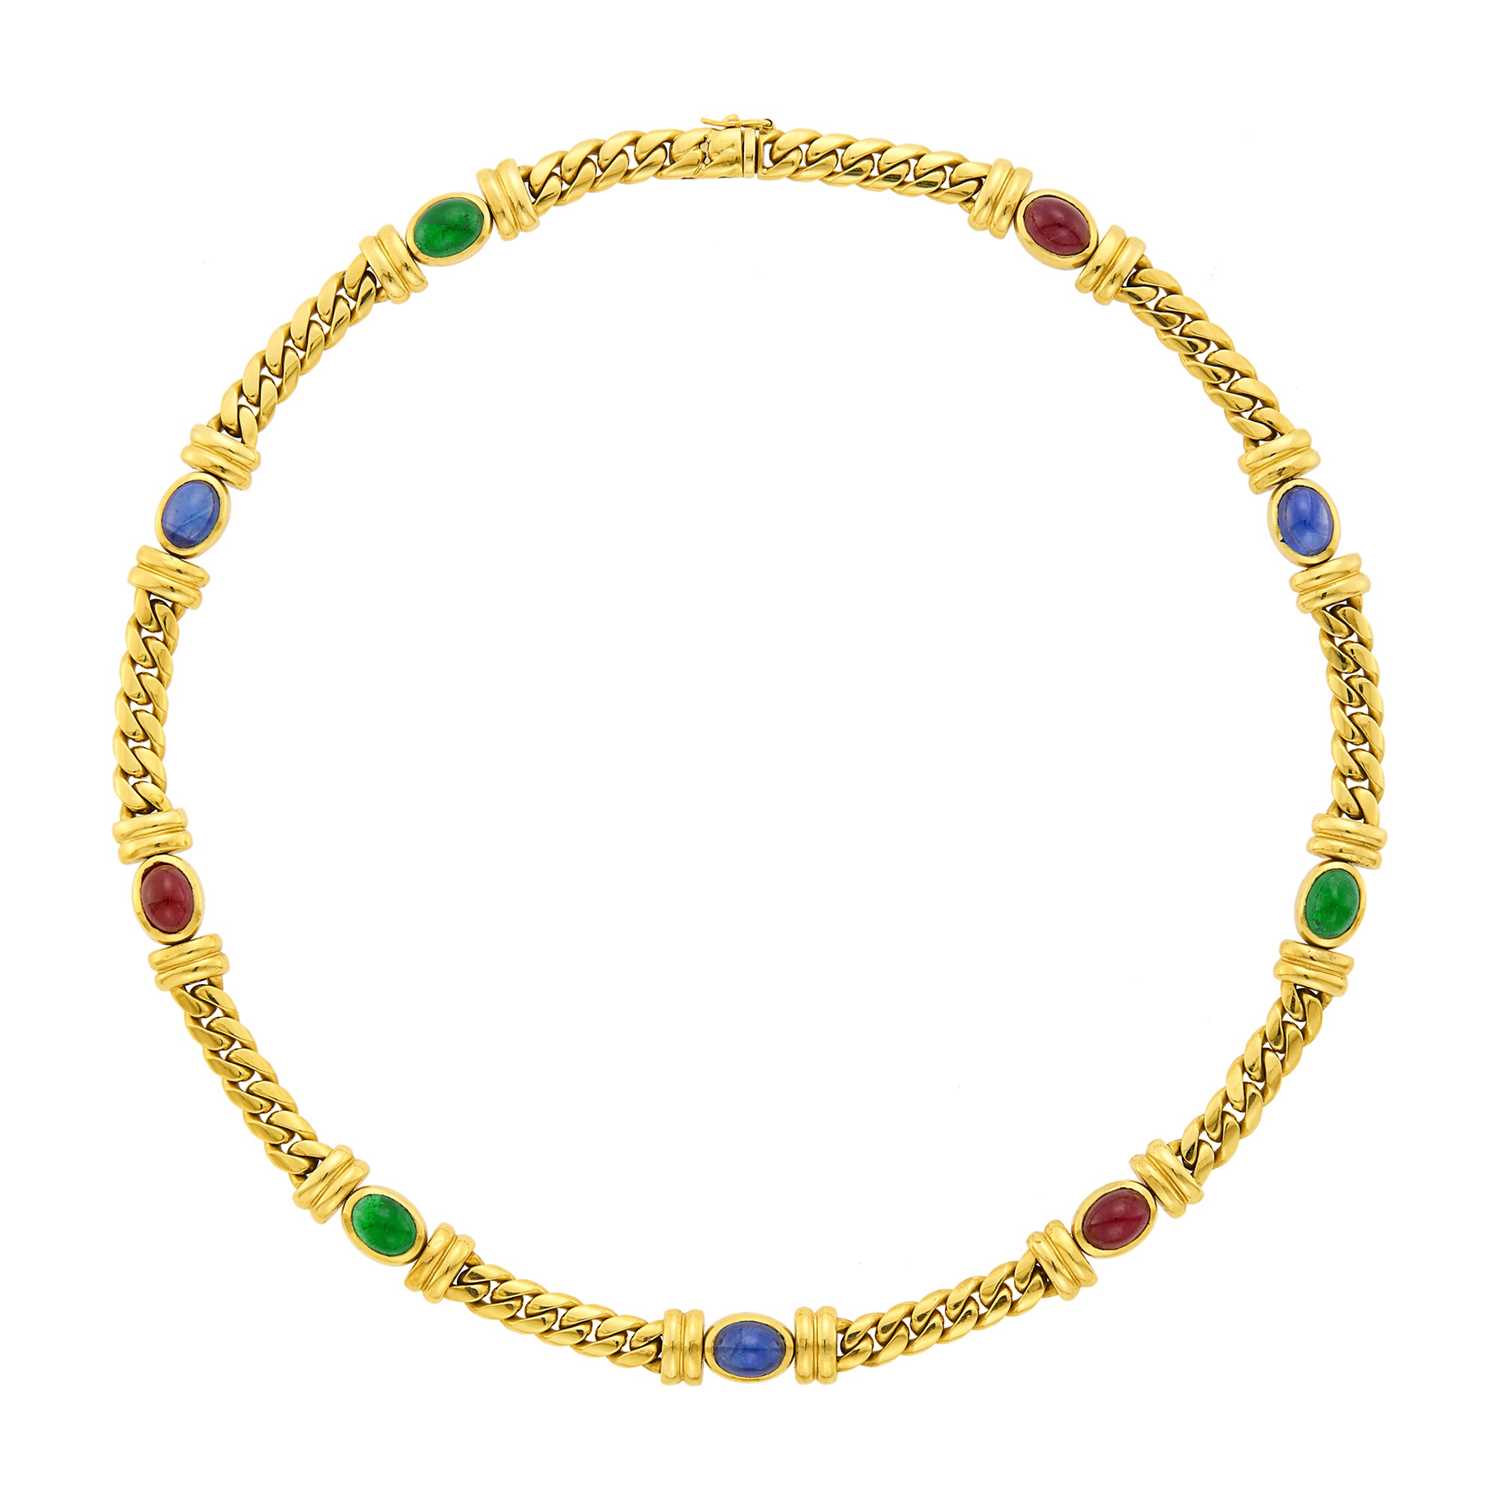 Lot 1061 - Gold and Cabochon Colored Stone Curb Link Necklace